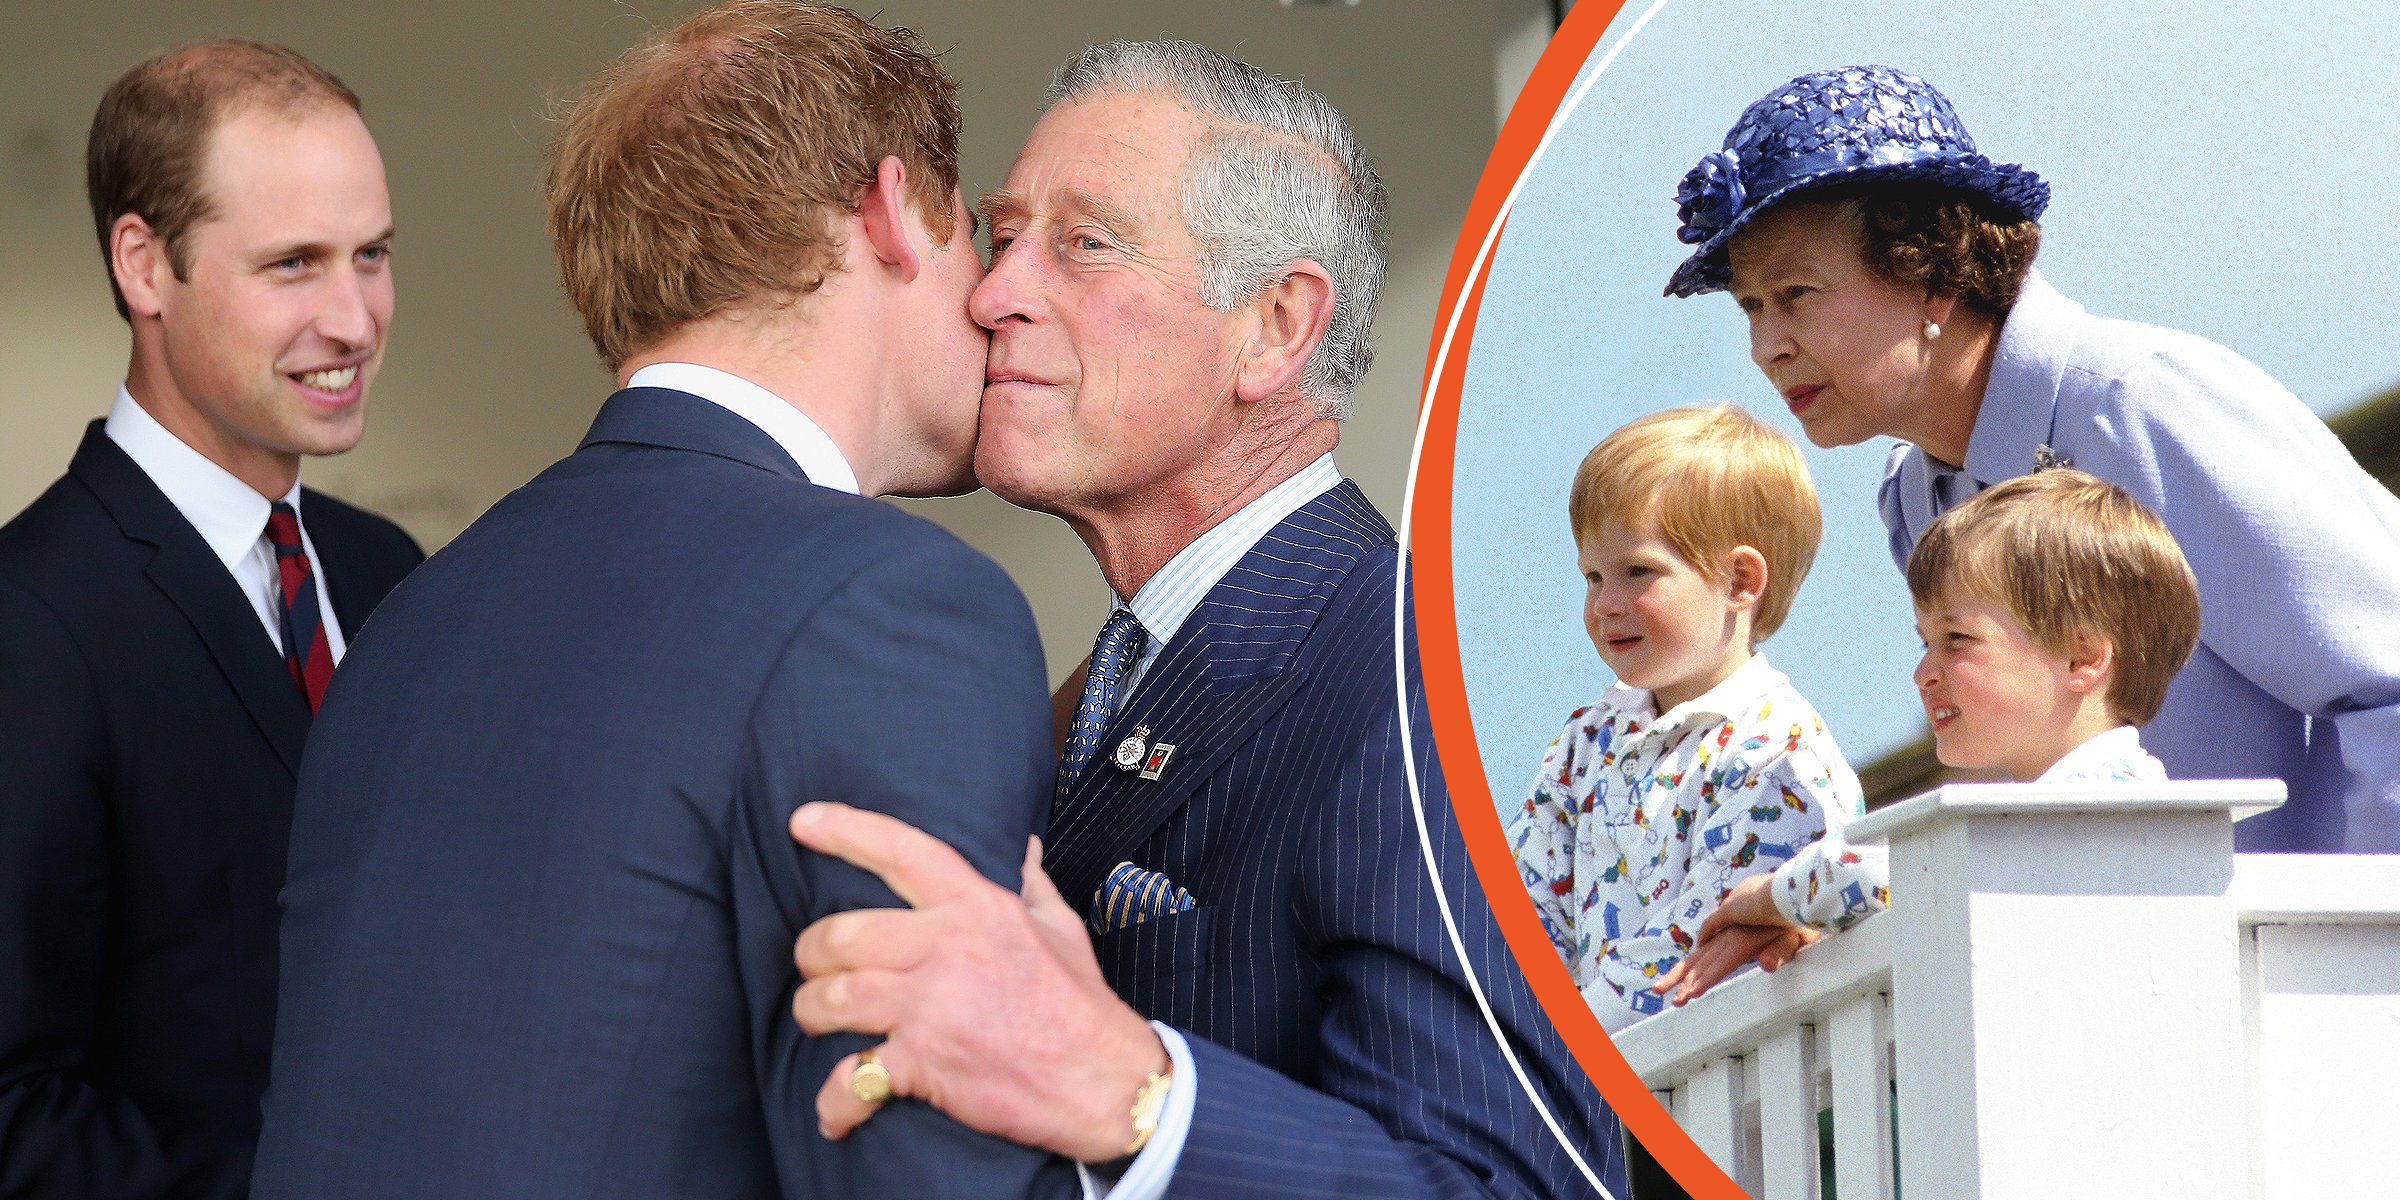 King Charles III, Prince Harry and Prince William | Queen Elizabeth II, Prince William and Prince Harry | Source: Getty Images